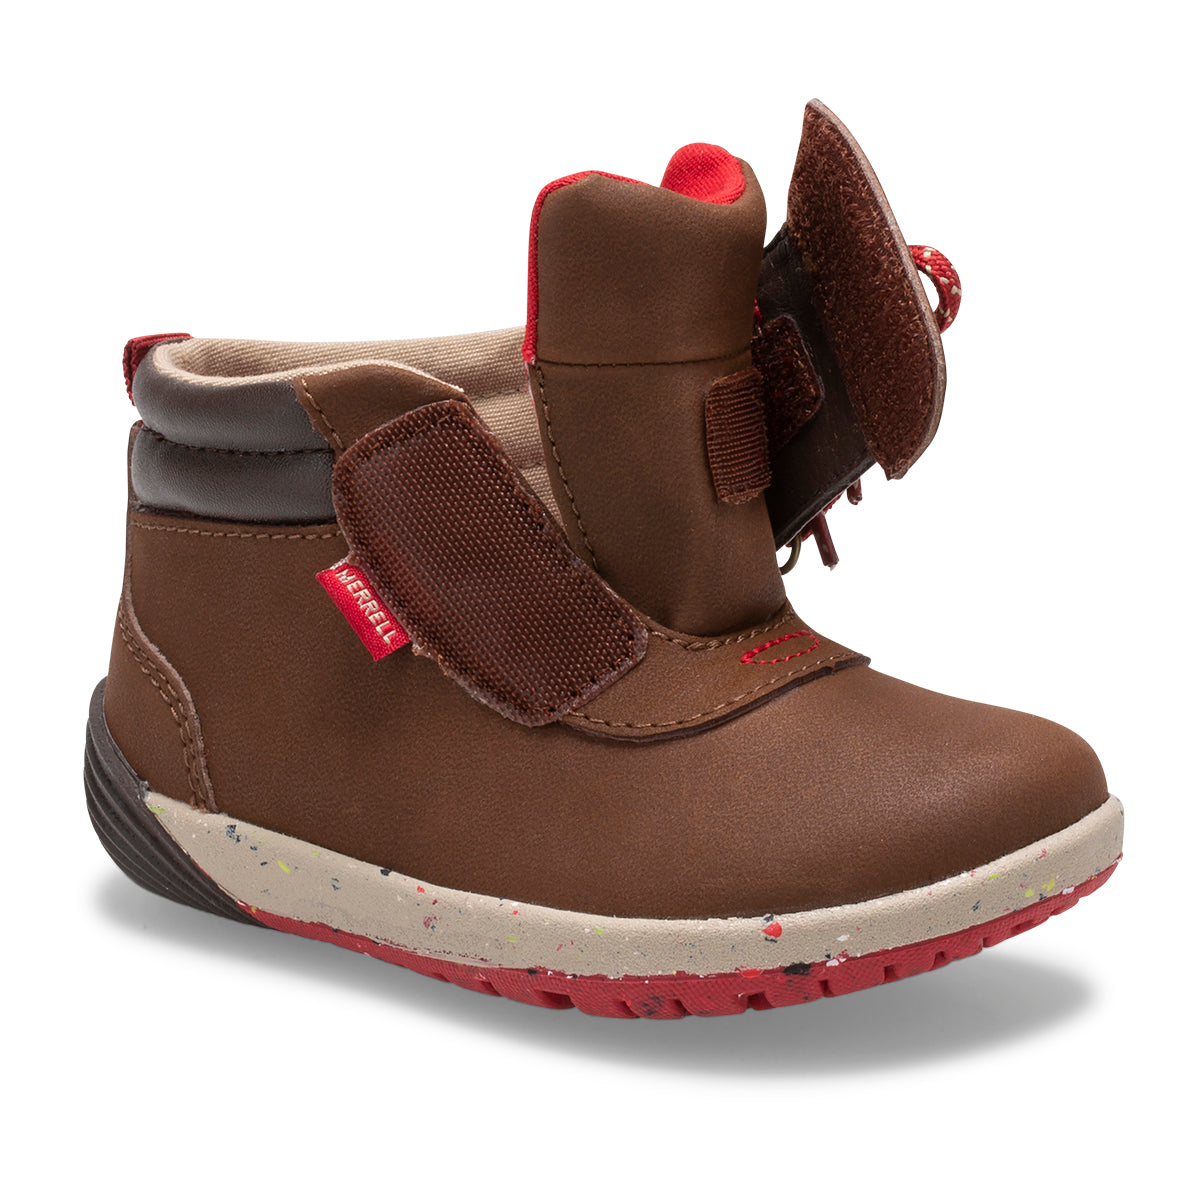 Bare Steps® Kid's Boot 2.0 Jr. - Brown Leather